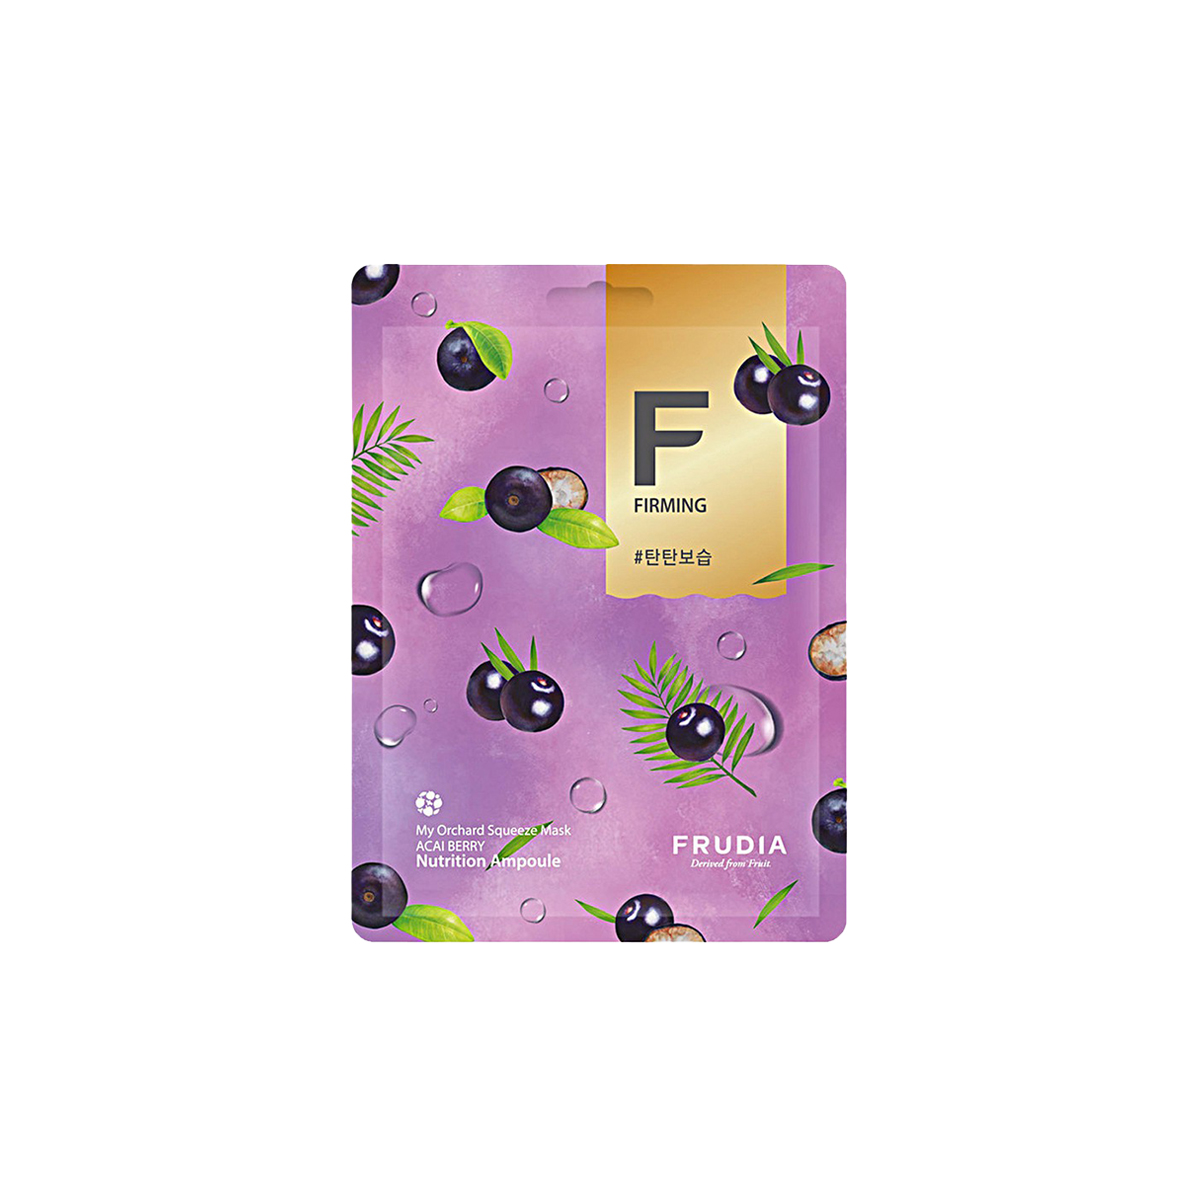 90-8803348040255-Frudia My Orchard Squeeze Acai Berry Sheet Mask